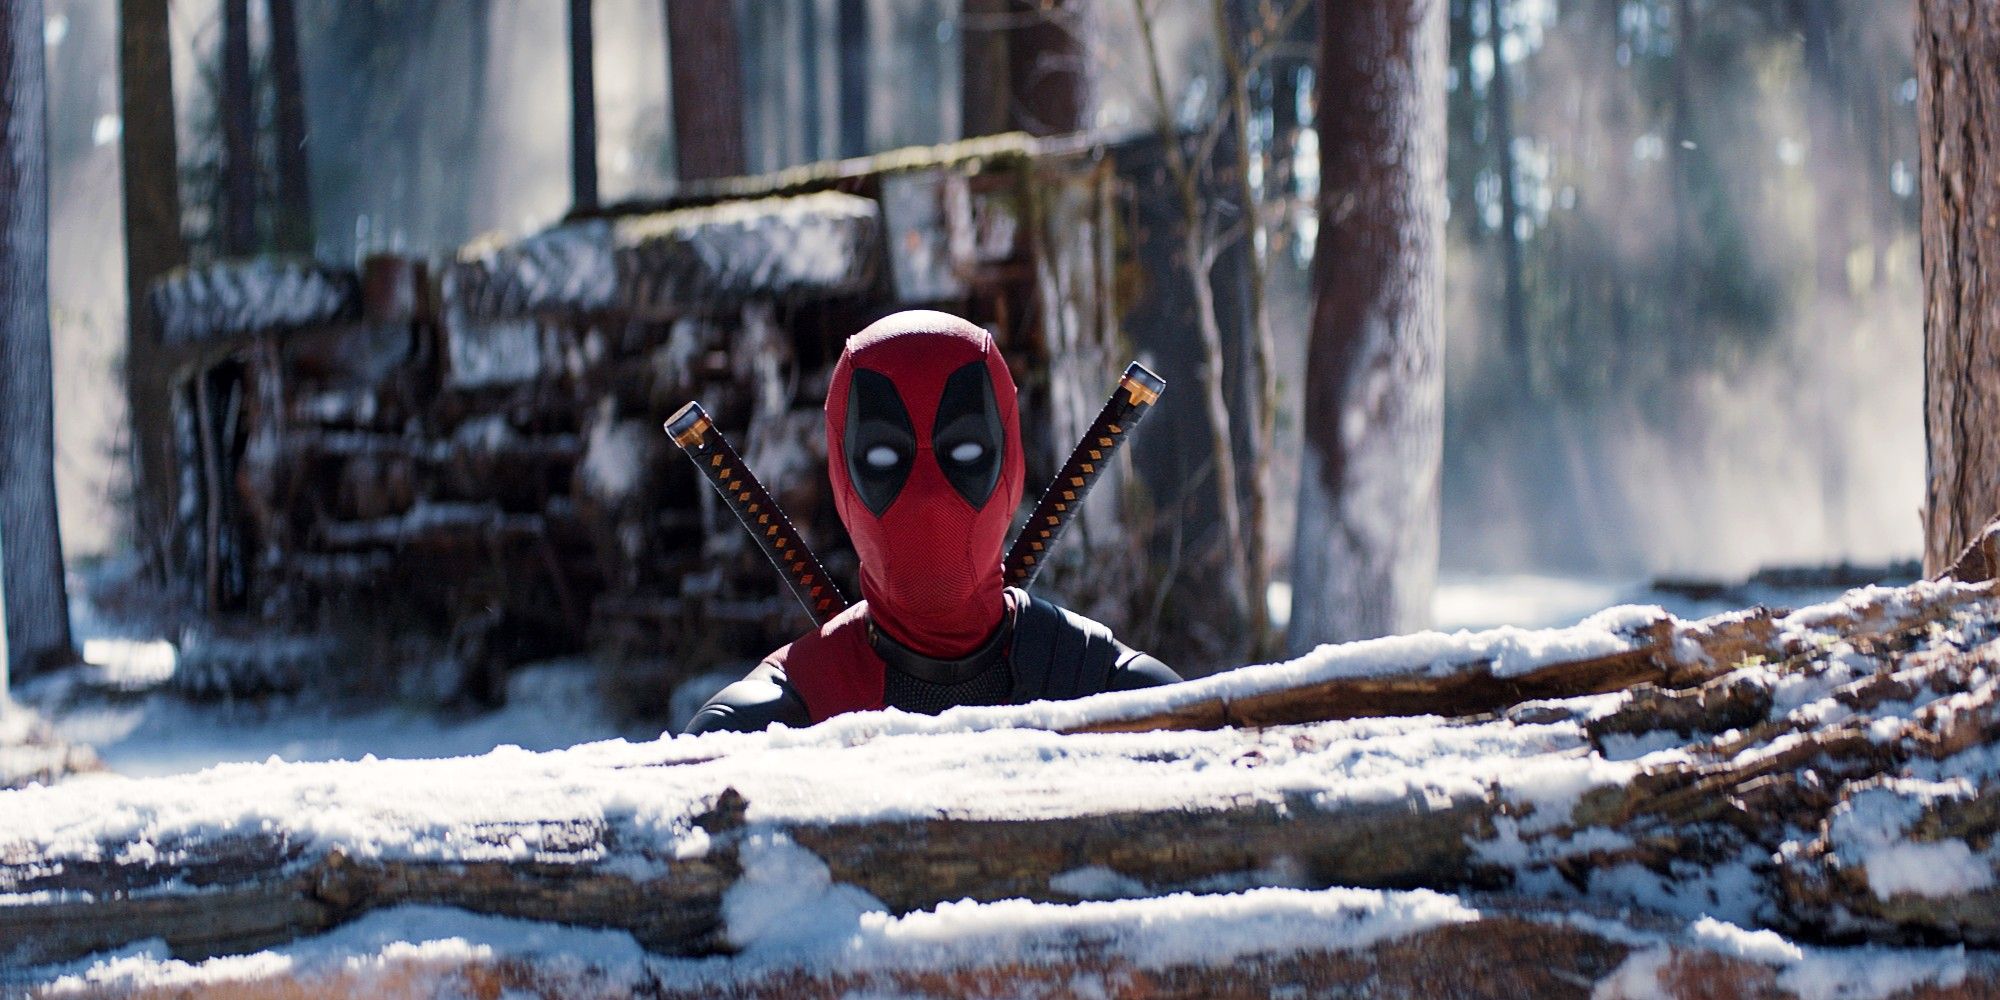 Ryan Reynolds As Deadpool In Costume Sticking His Head Up Past A Fallen Log In The Snow In Deadpool and Wolverine